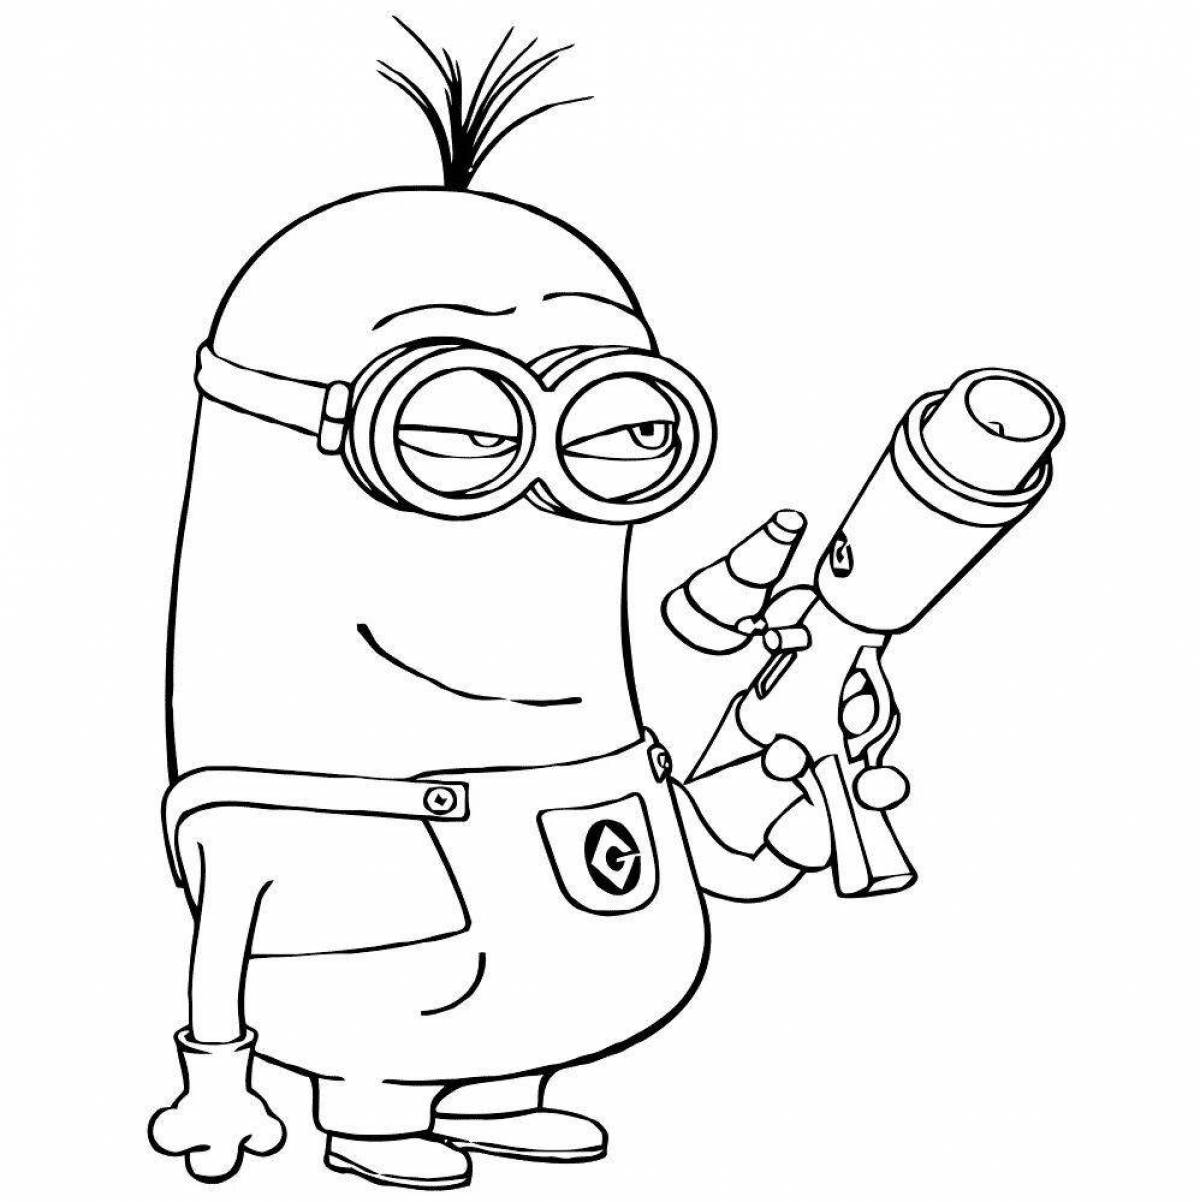 Coloring cute kevin the minion